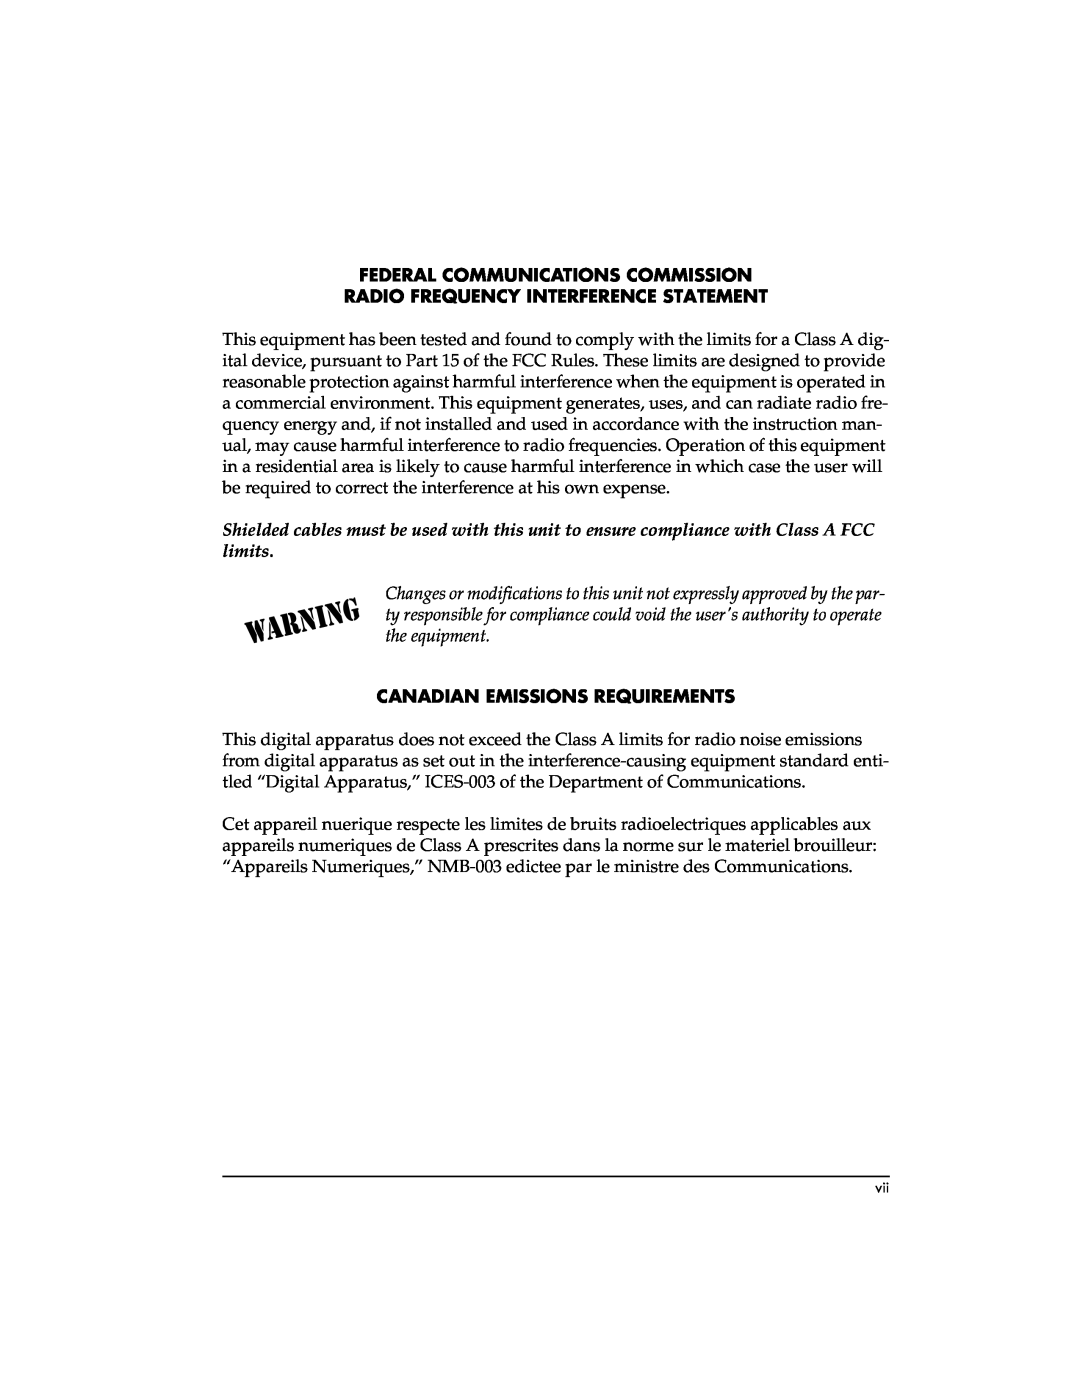 ADTRAN T3SU 300 Federal Communications Commission, Radio Frequency Interference Statement, Canadian Emissions Requirements 